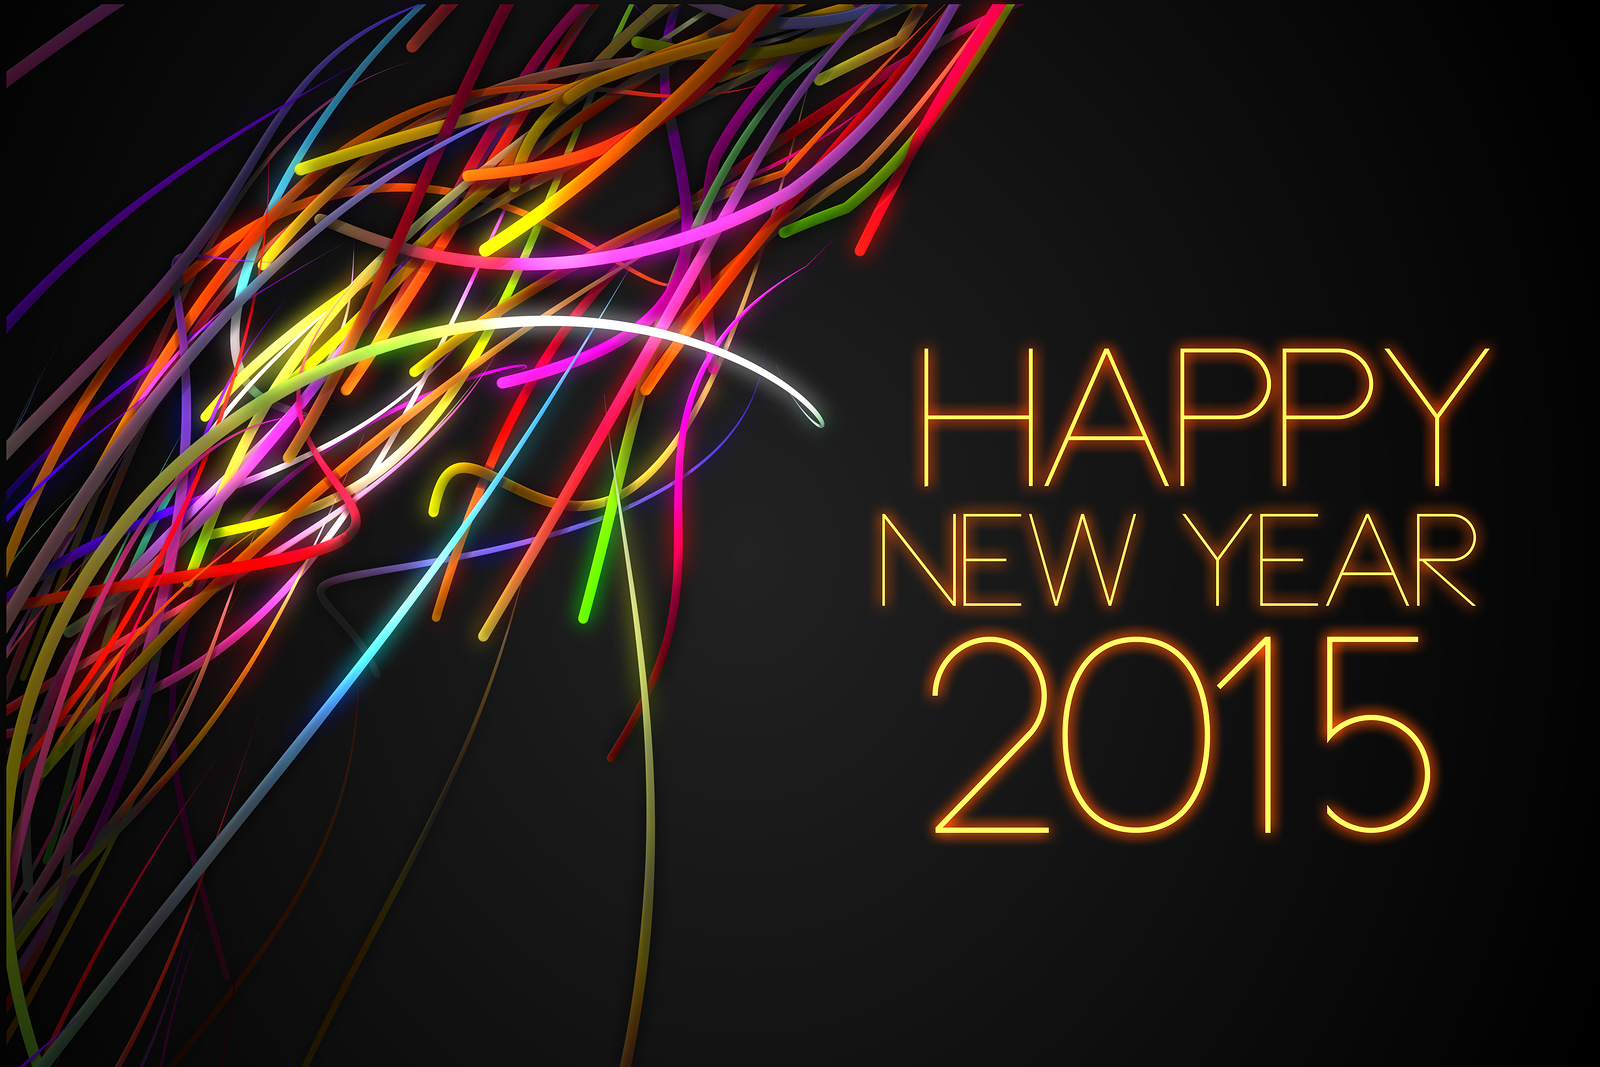 2015 New Year Eve Image For Desktop